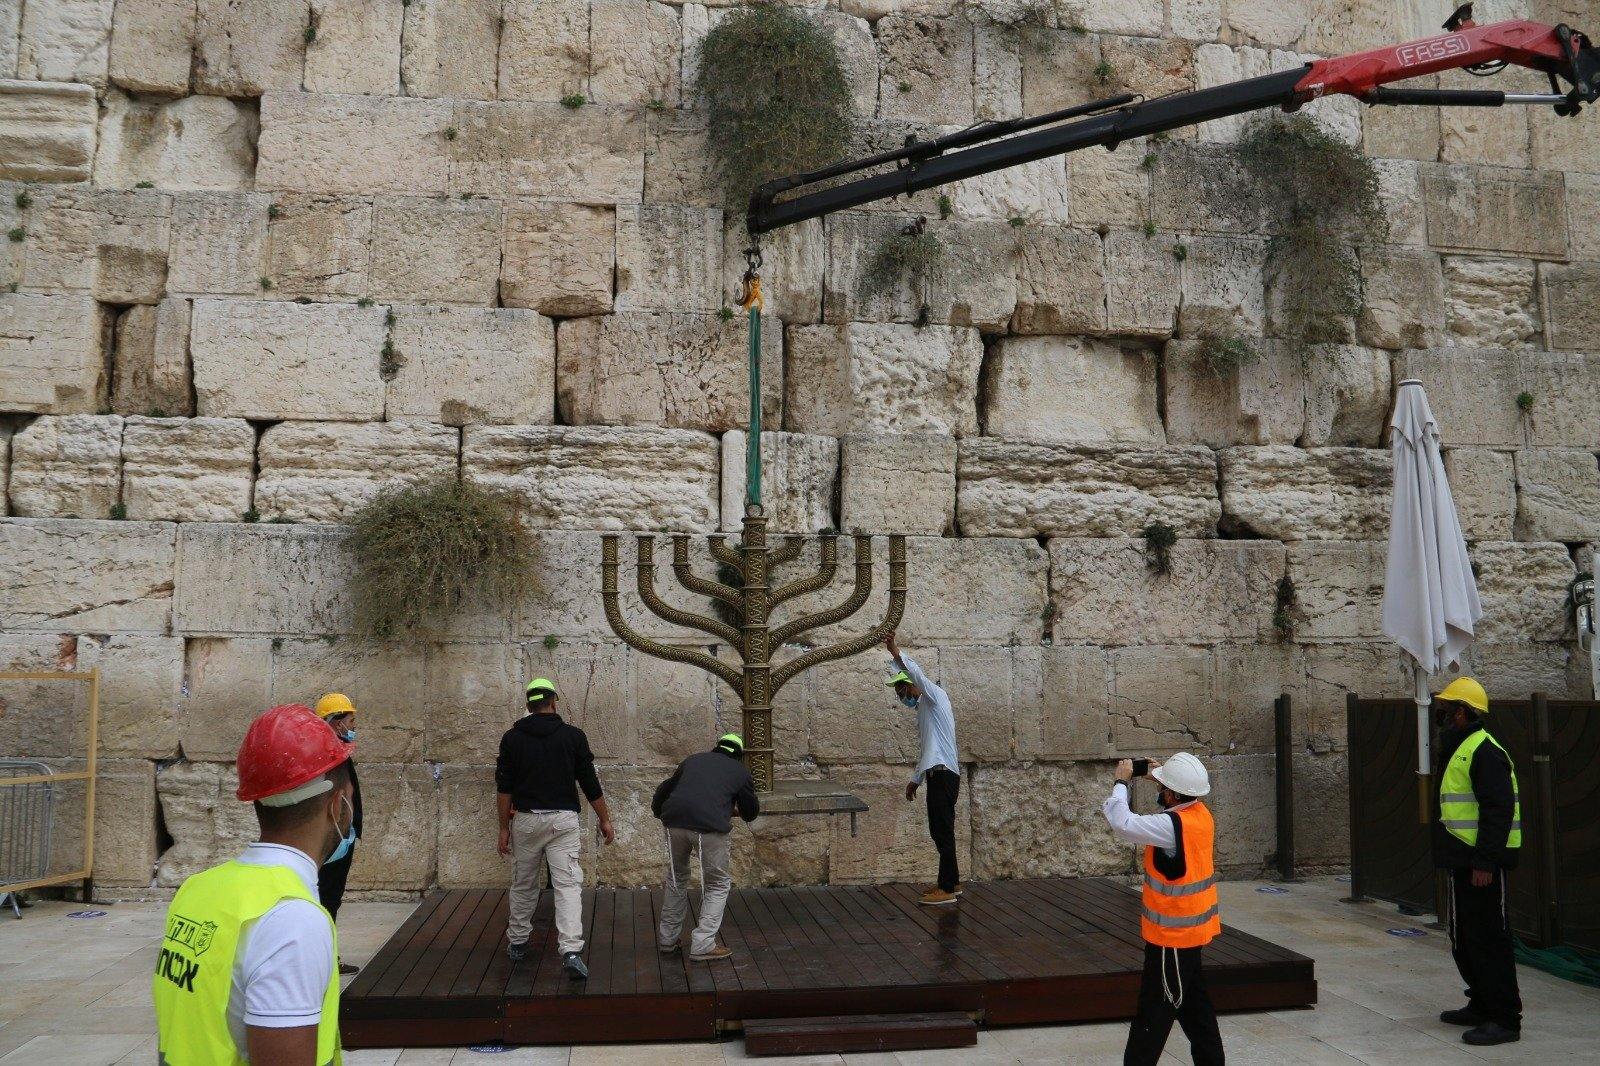 ASSEMBLY OF THE CHANUKAH AT THE WAILING WALL